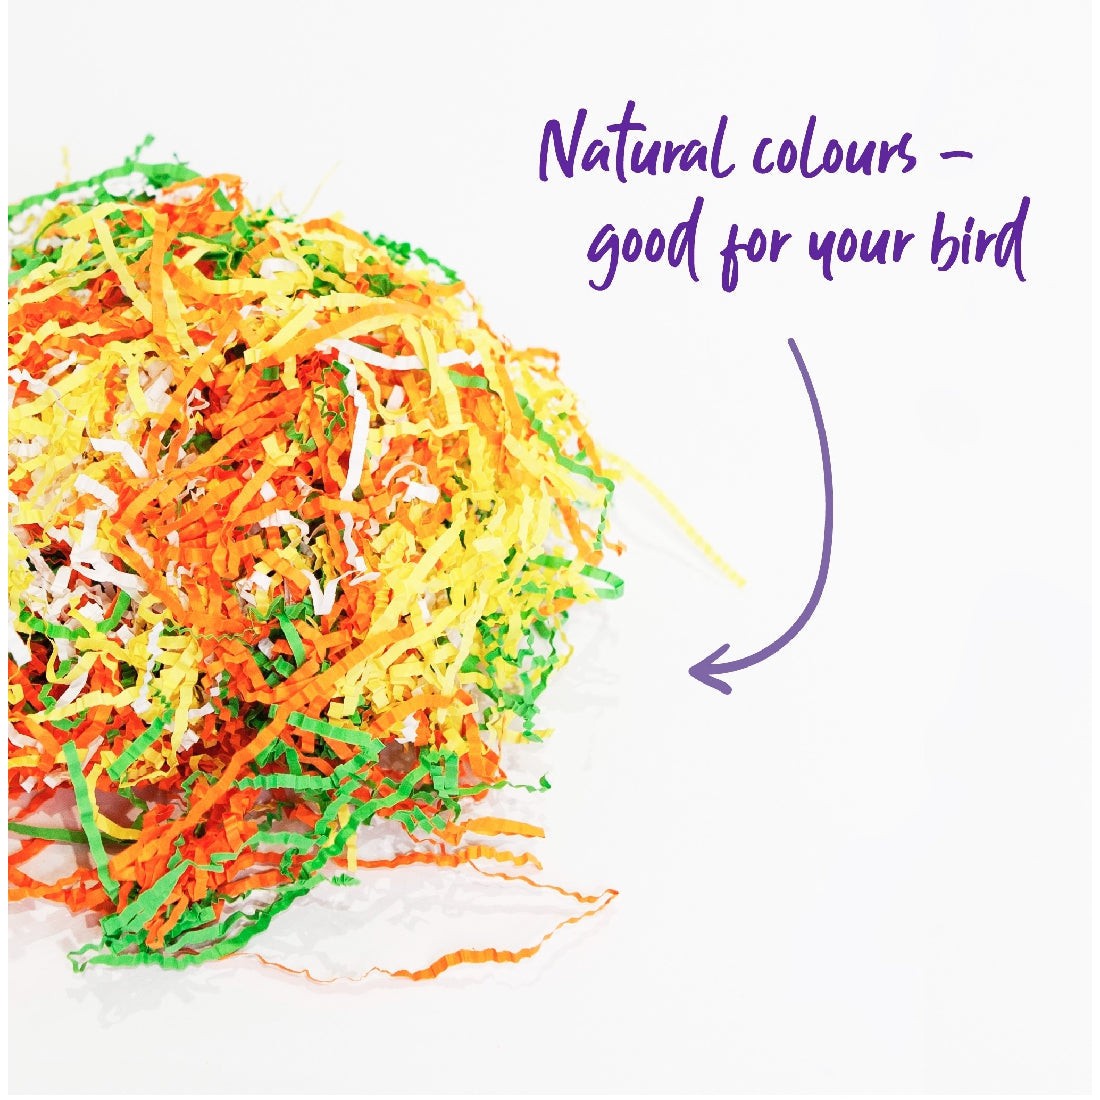 Colorful shredded paper bird toy with "good for your bird" text.